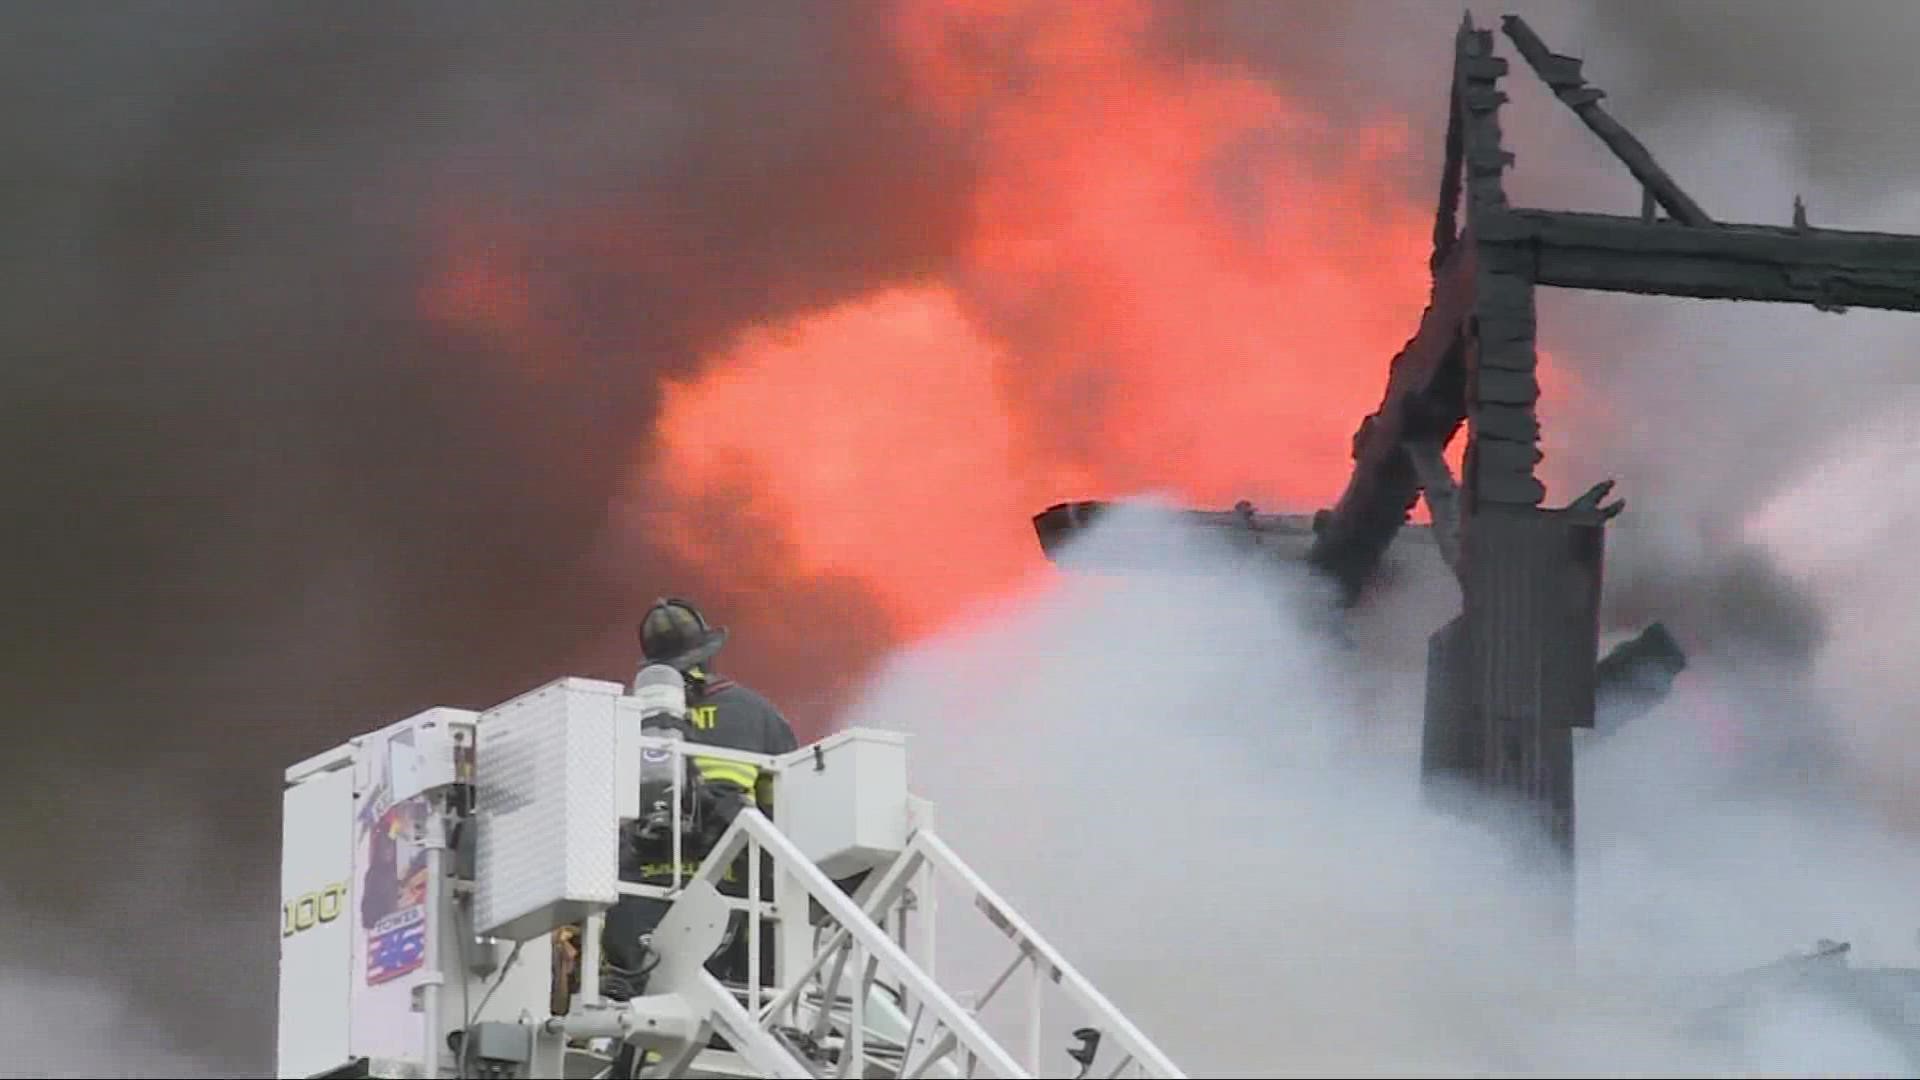 Flames were seen shooting into the sky as firefighters battled the blaze.